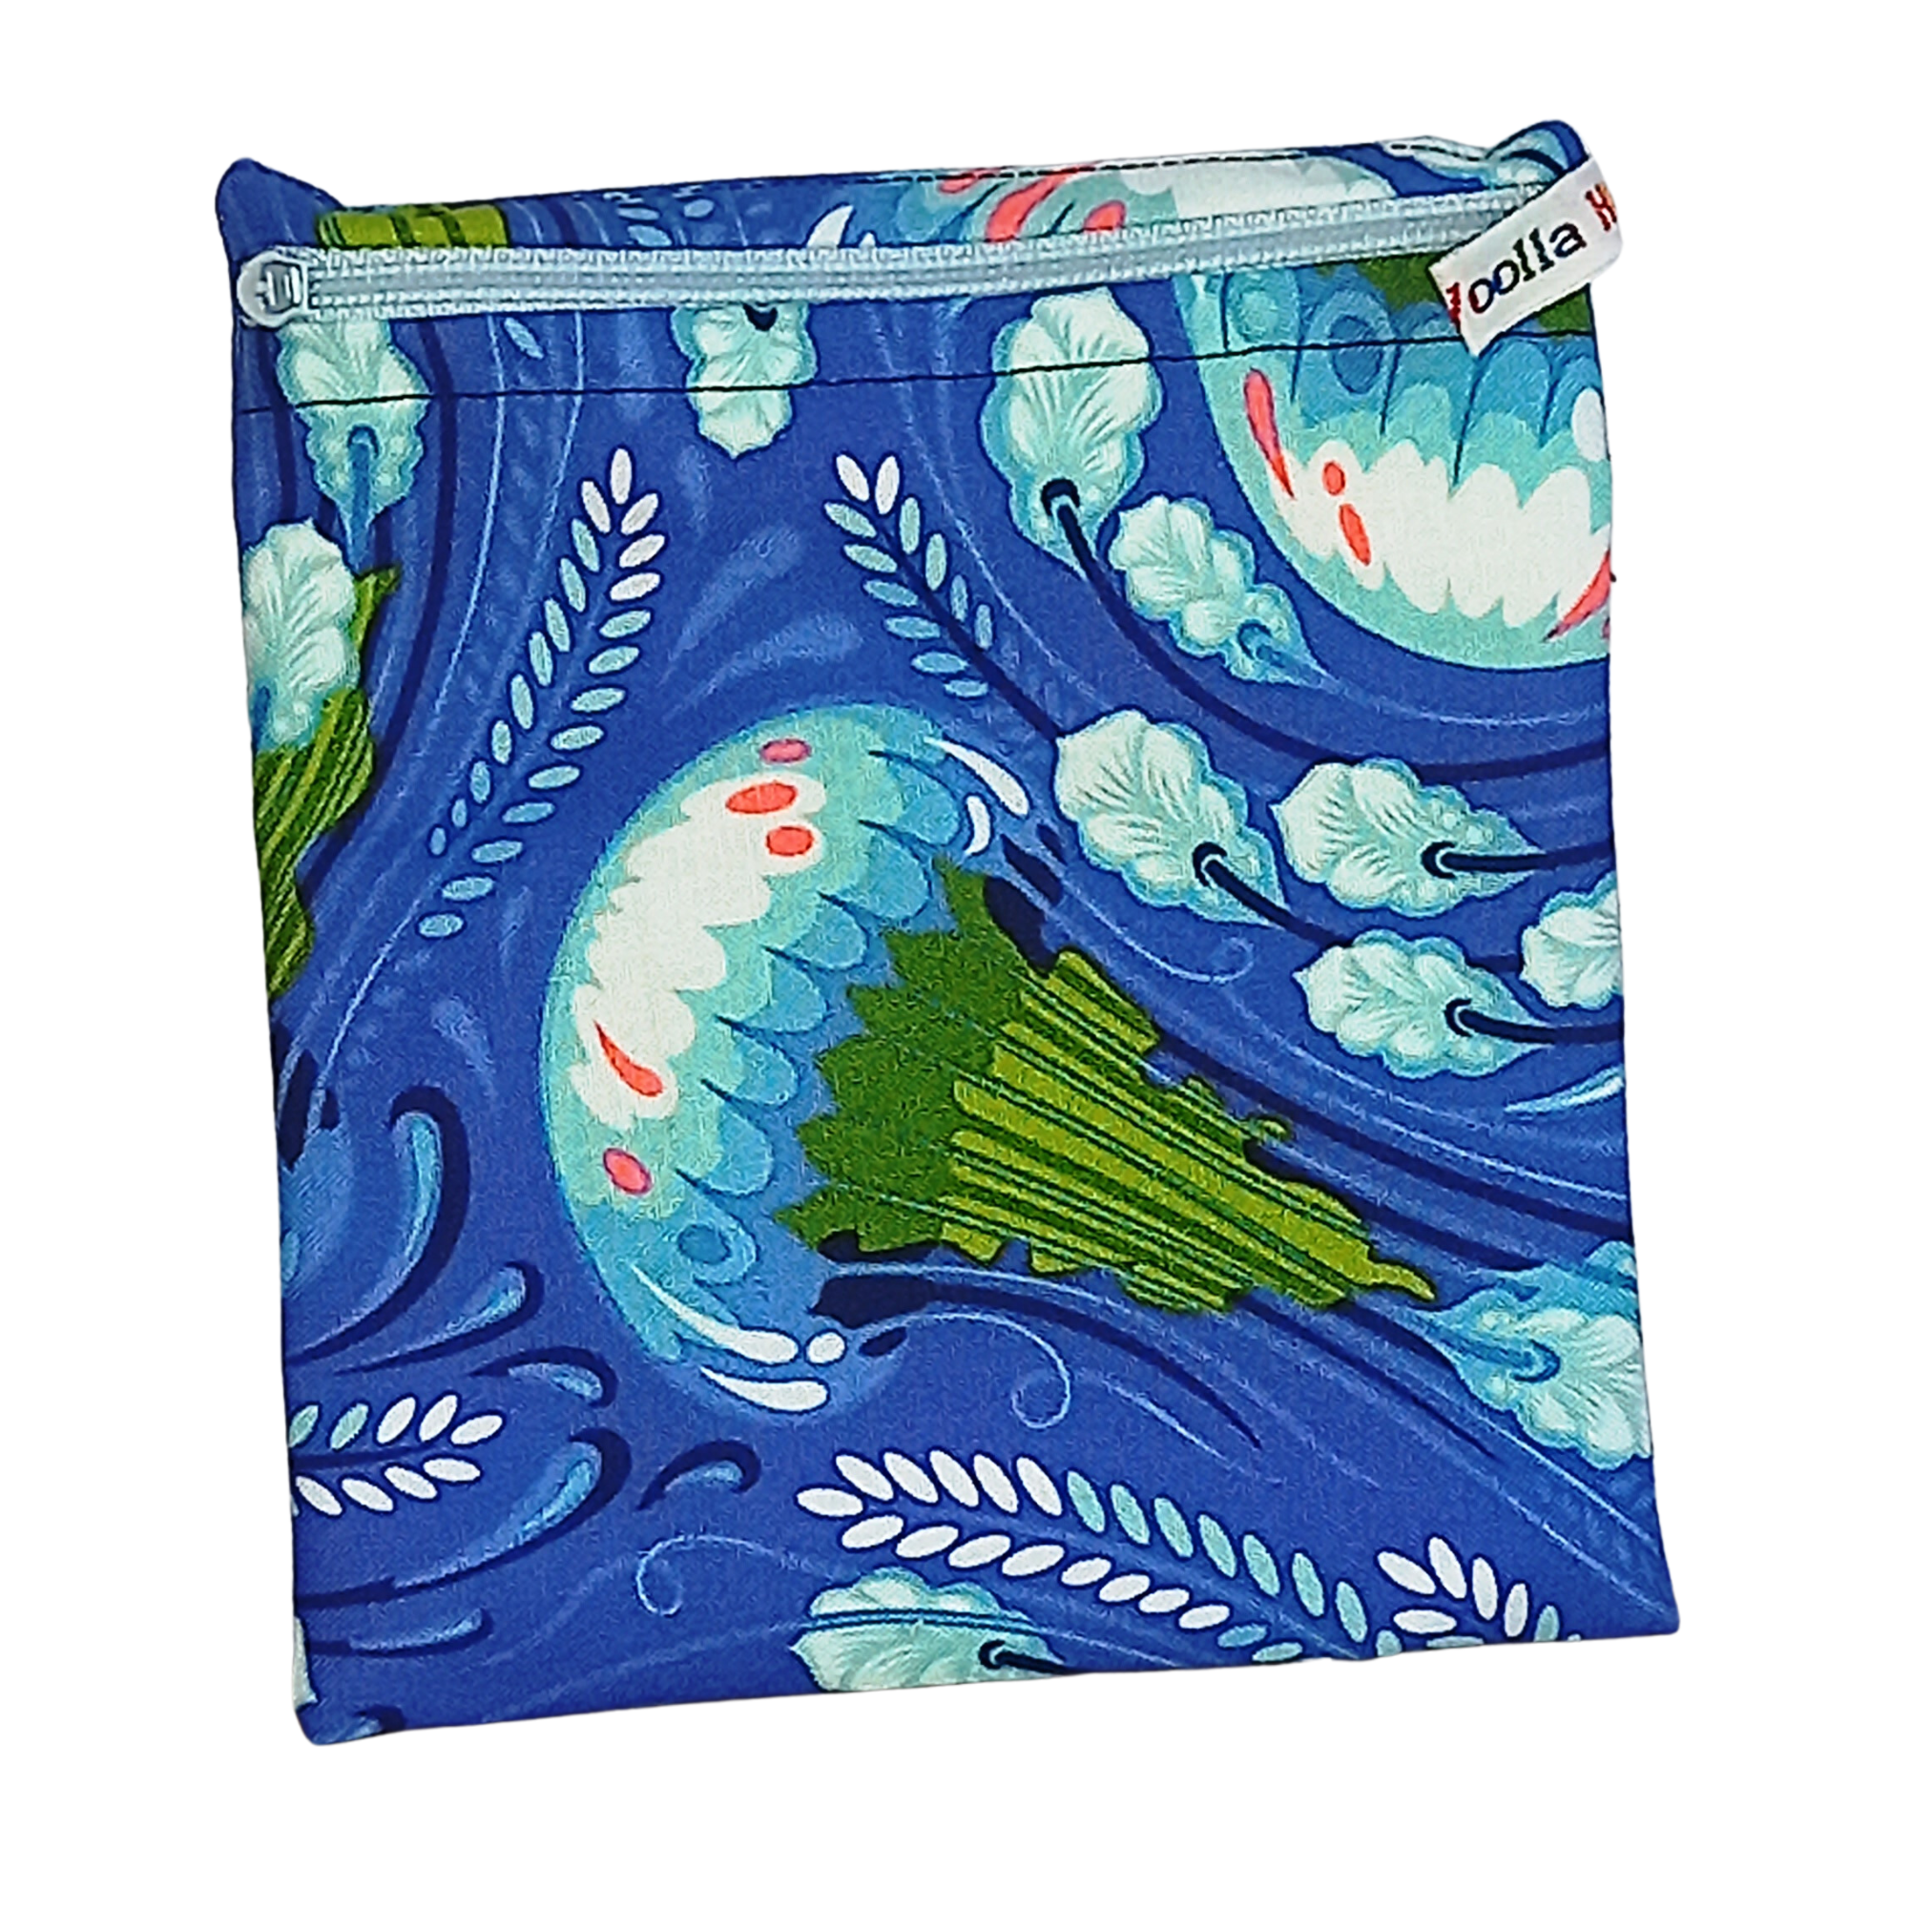 Jellyfish Swirl - Small Poppins Pouch Washable Snack Bag